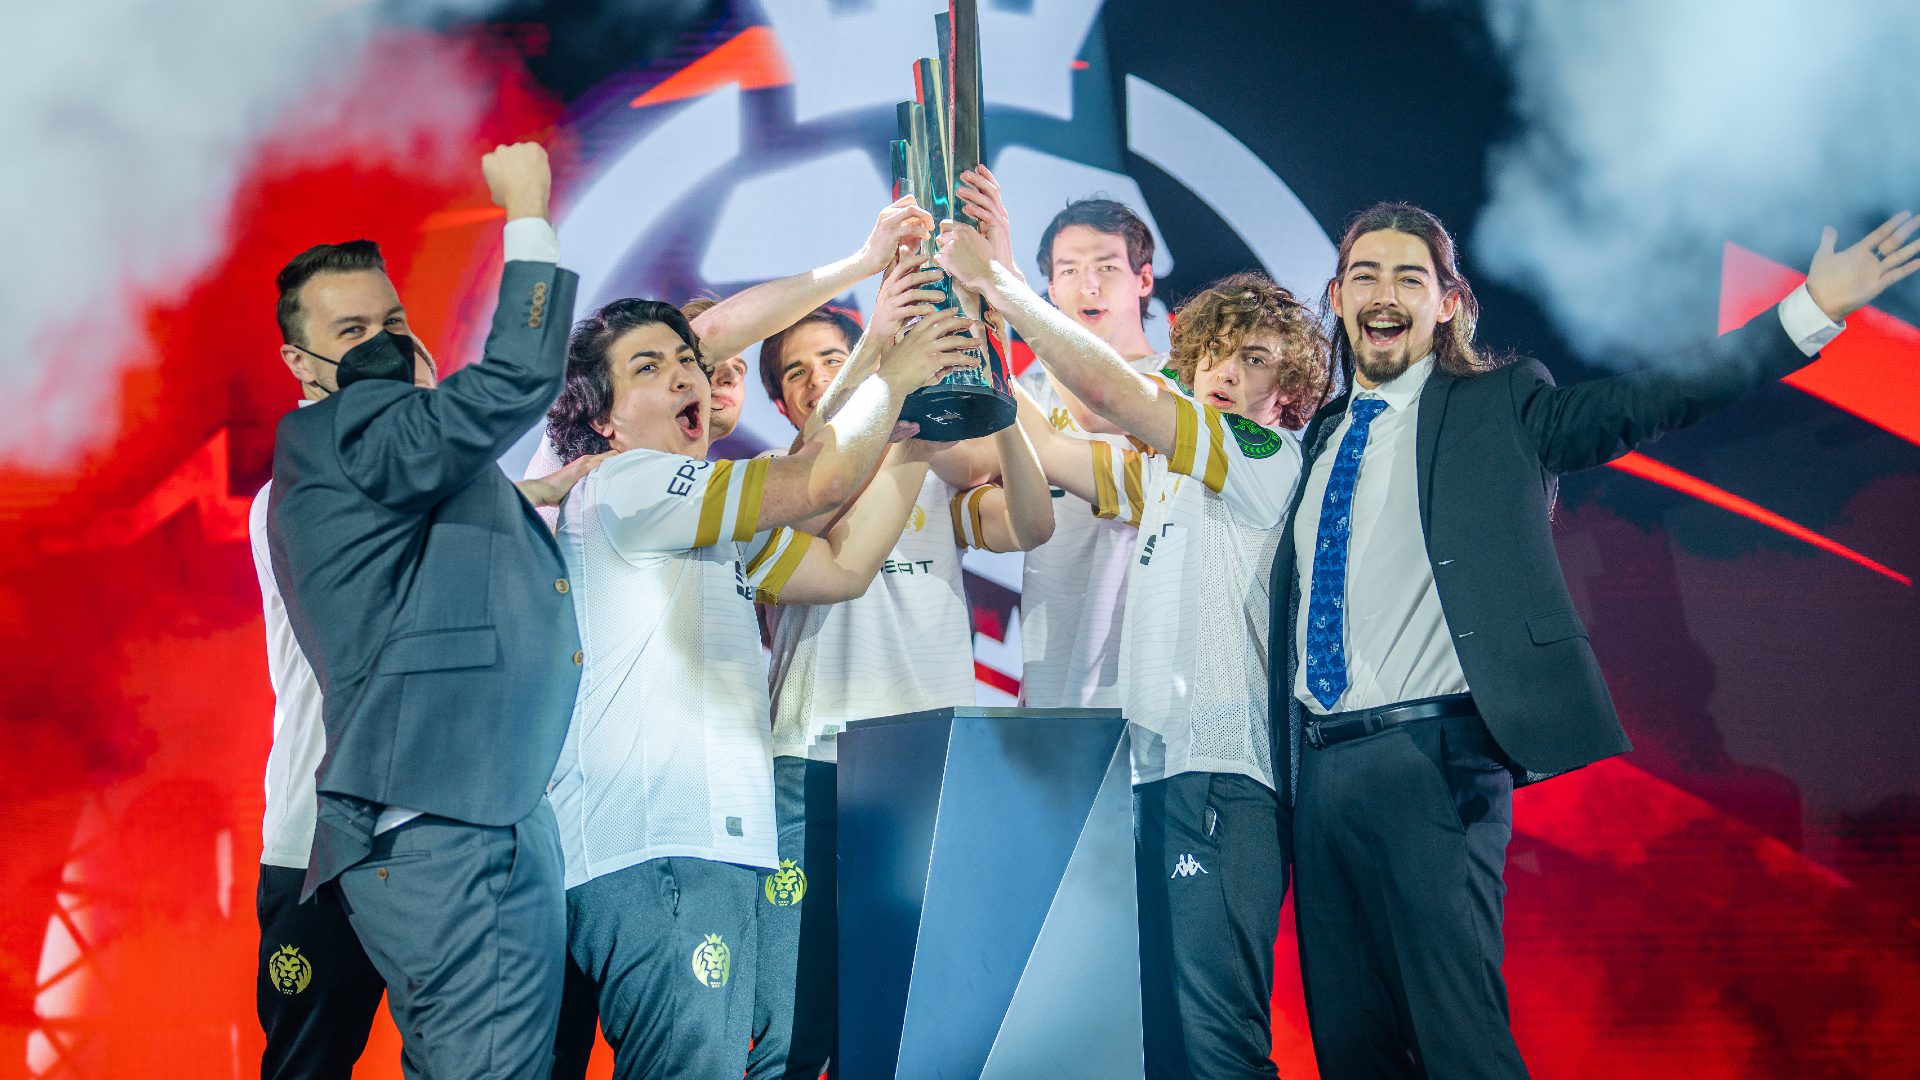 MAD Lions members explain how they battled burnout to become LEC Summer Split champions.